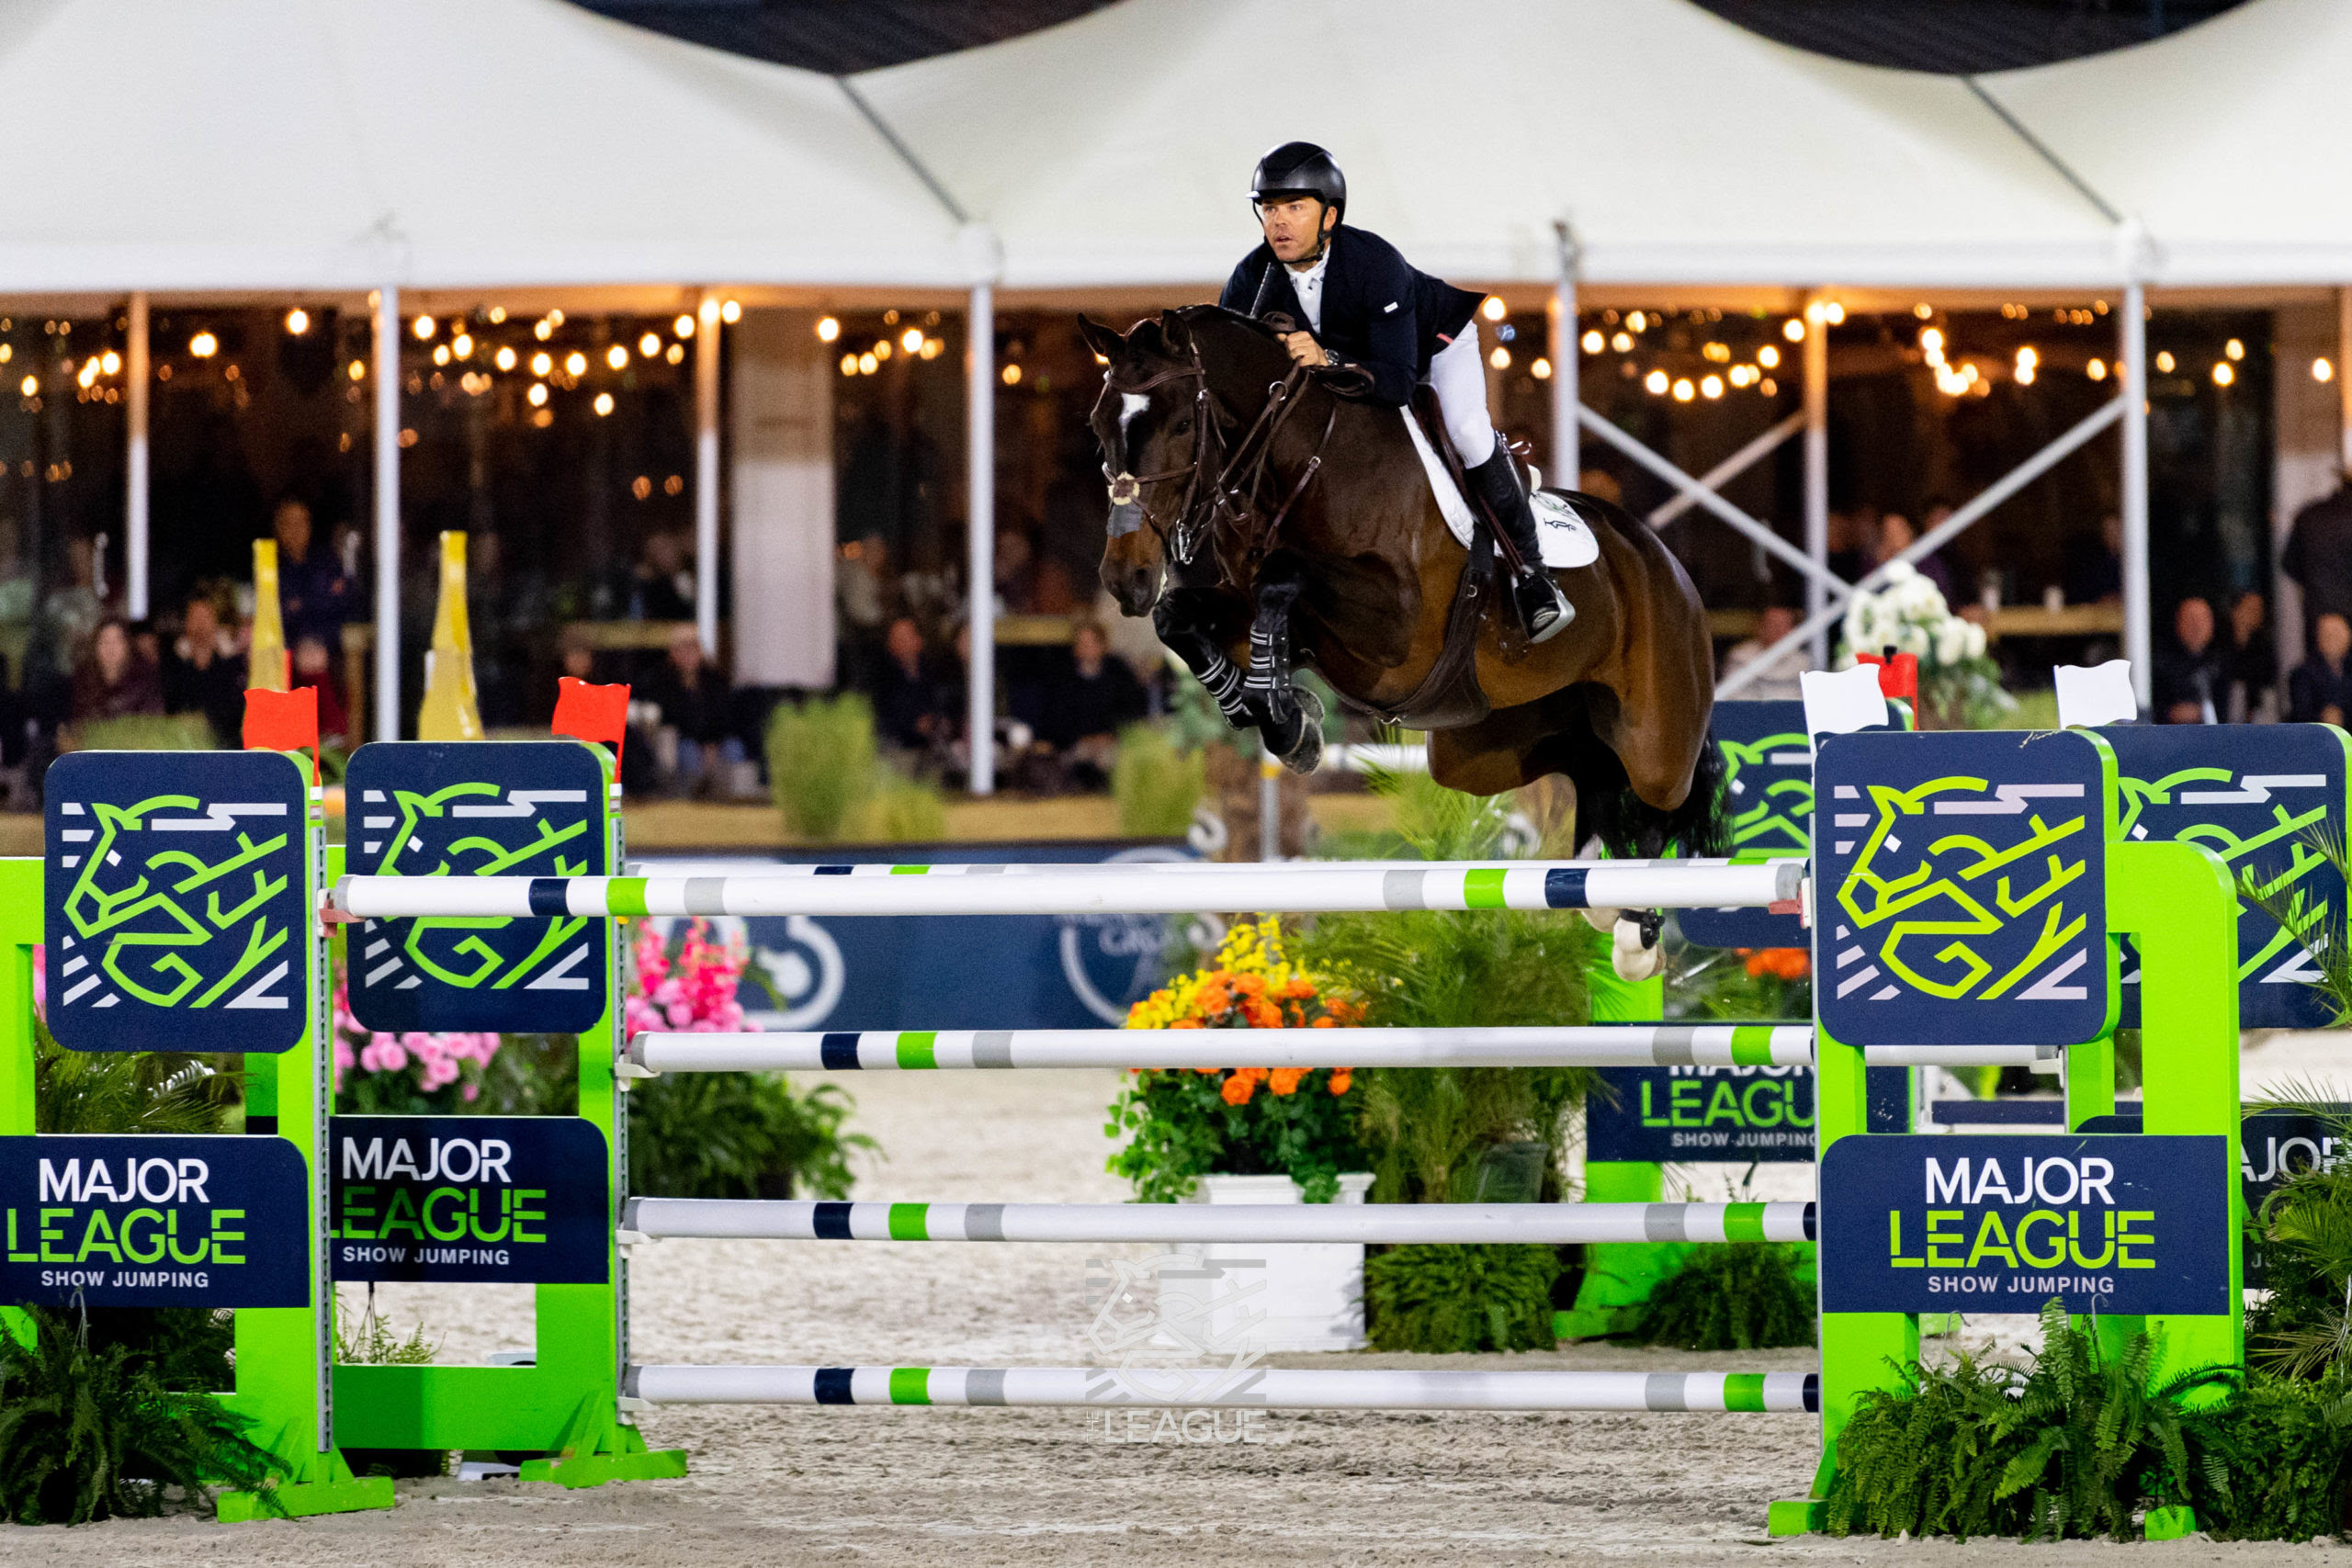 Million-Dollar Individual and Team Finals to Highlight 2023 Major League Show Jumping Schedule